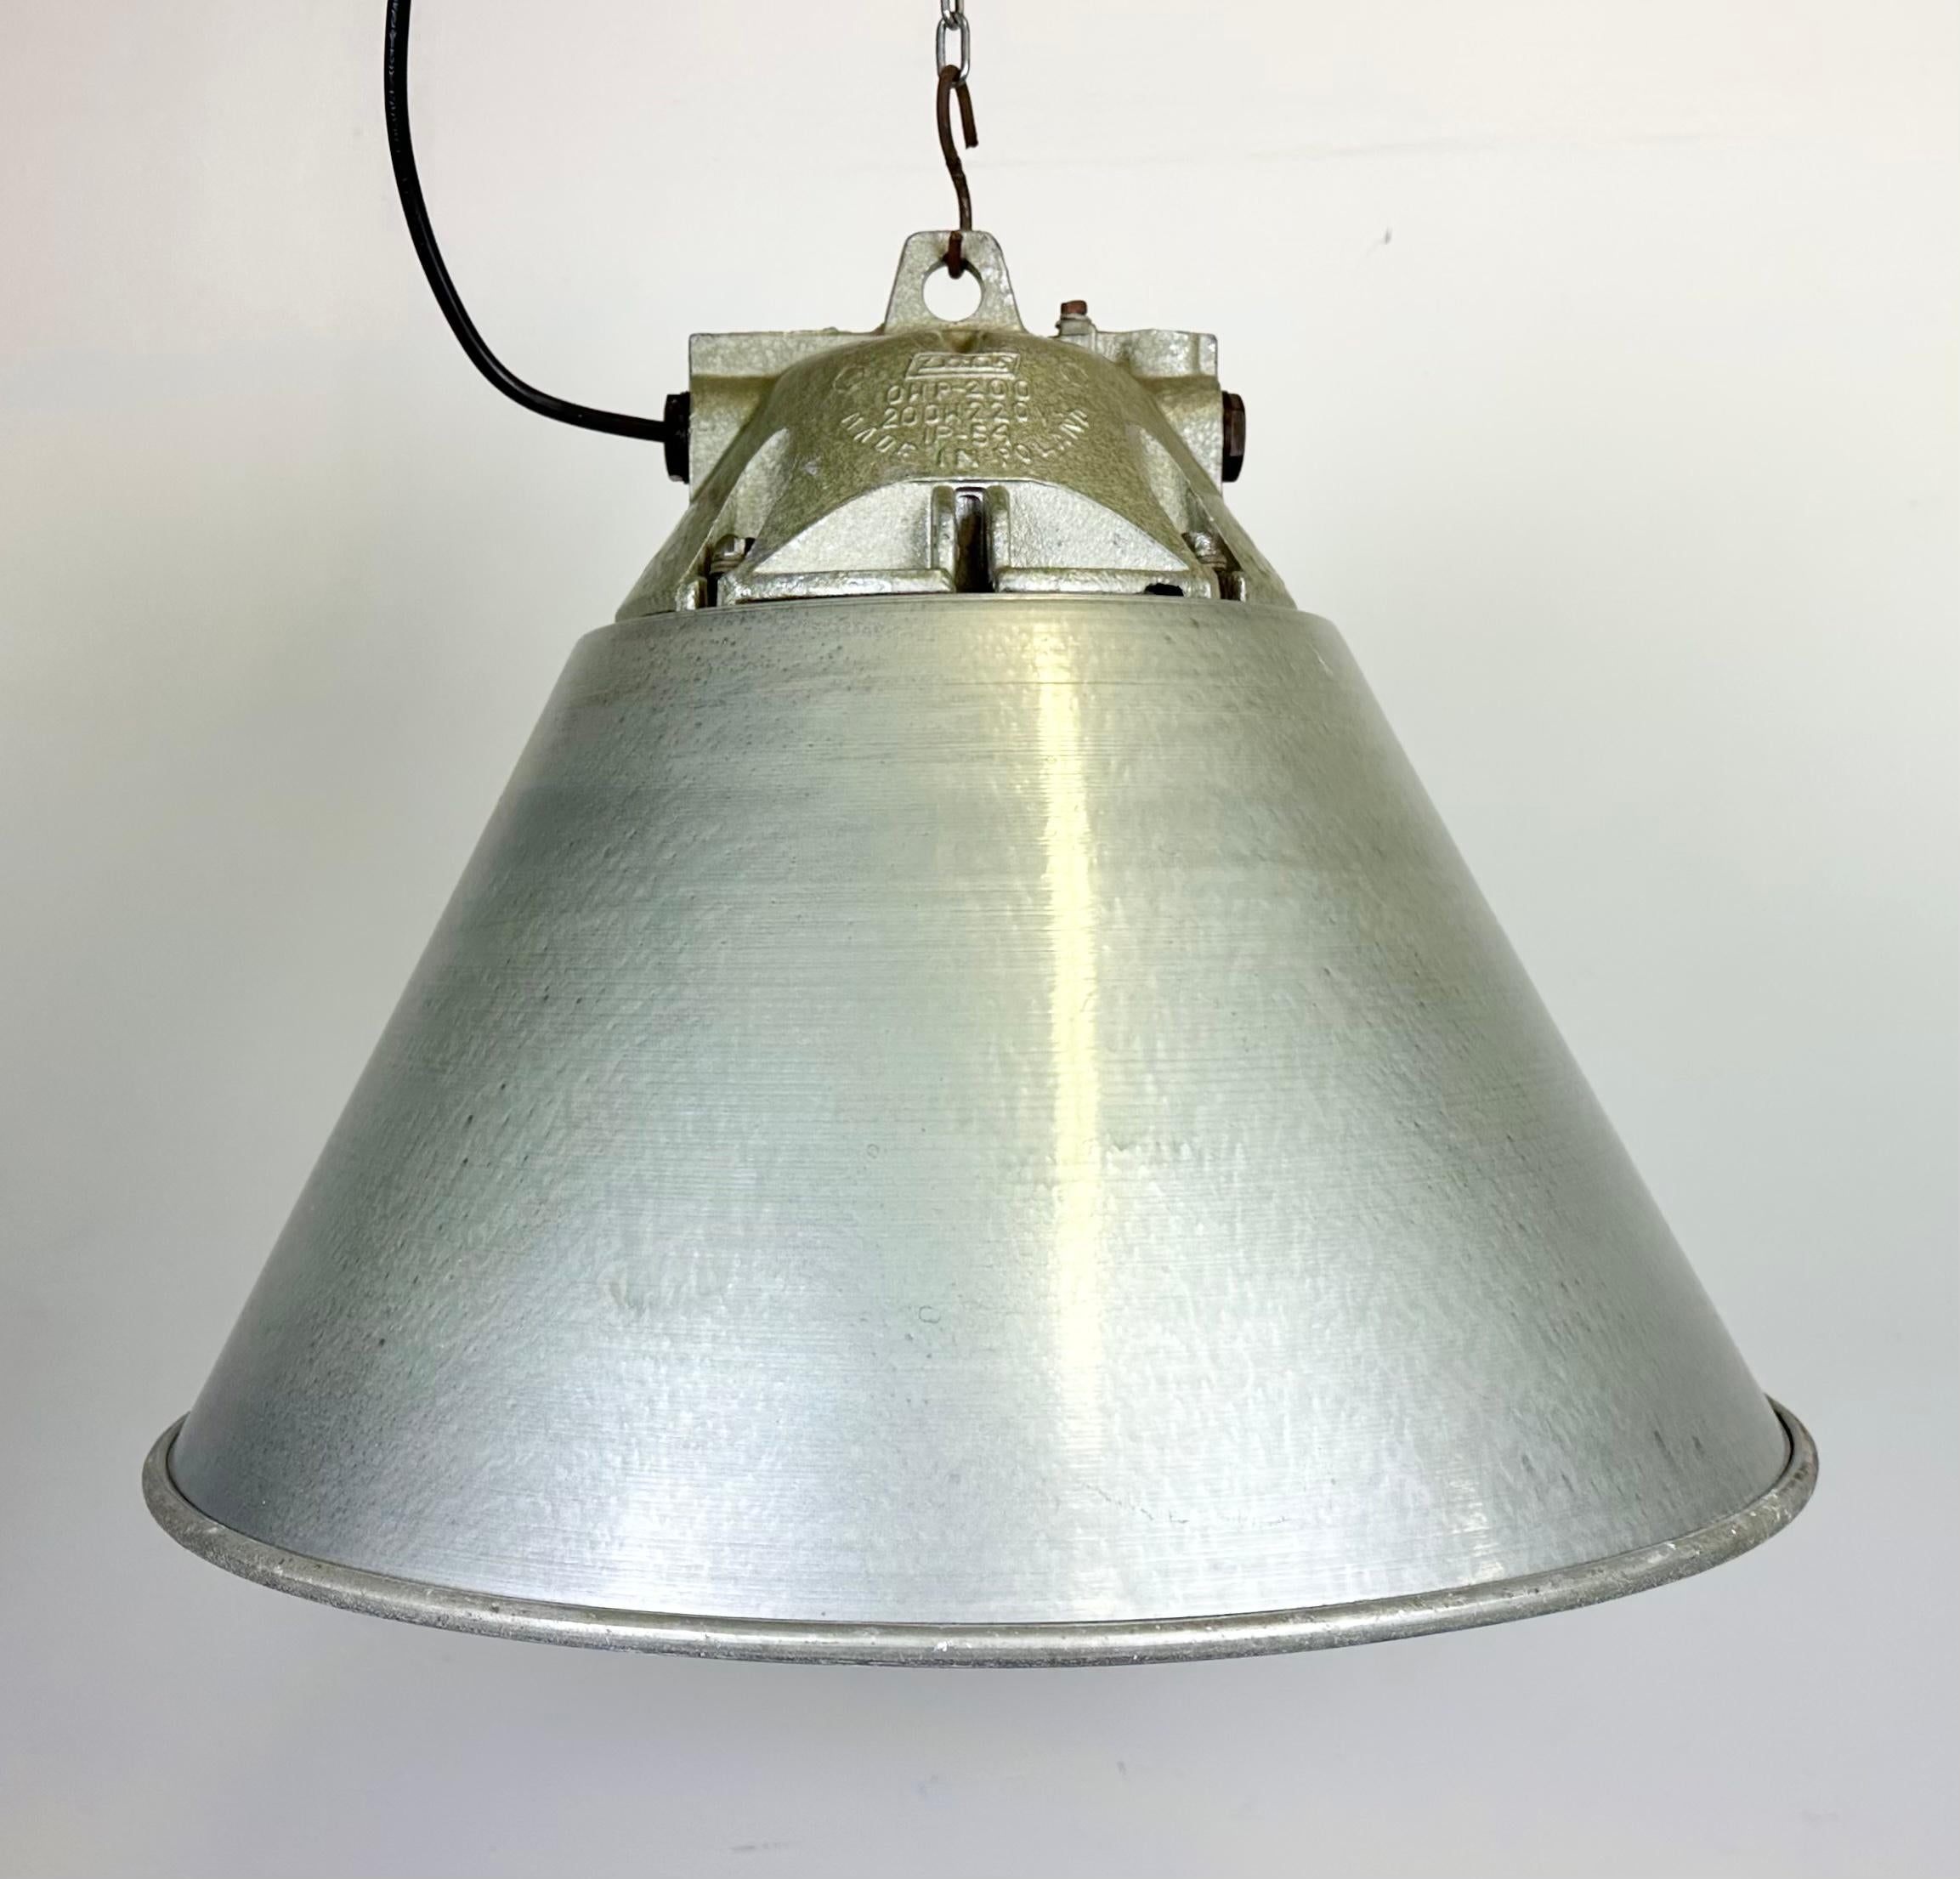 Polish Grey Industrial Explosion Proof Lamp with Aluminum Shade from Zaos, 1970s For Sale